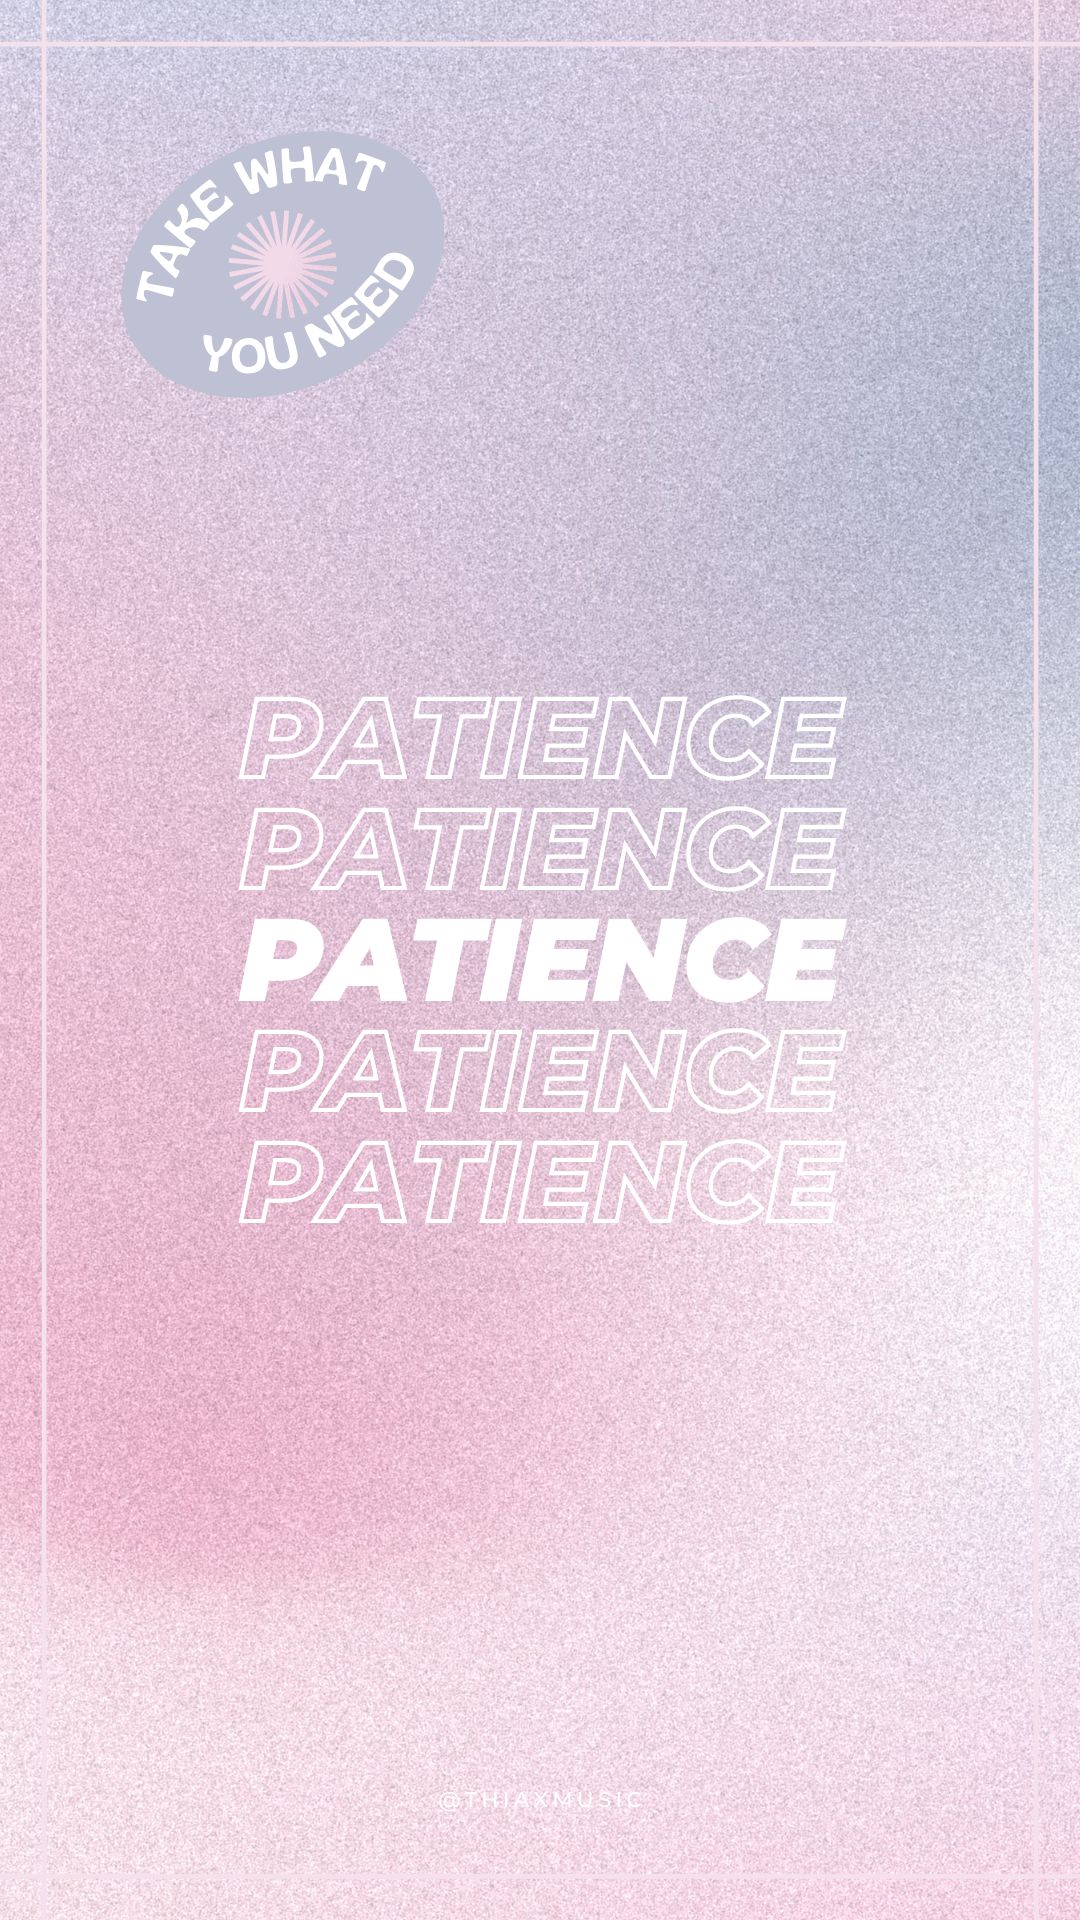 19 Patience.png